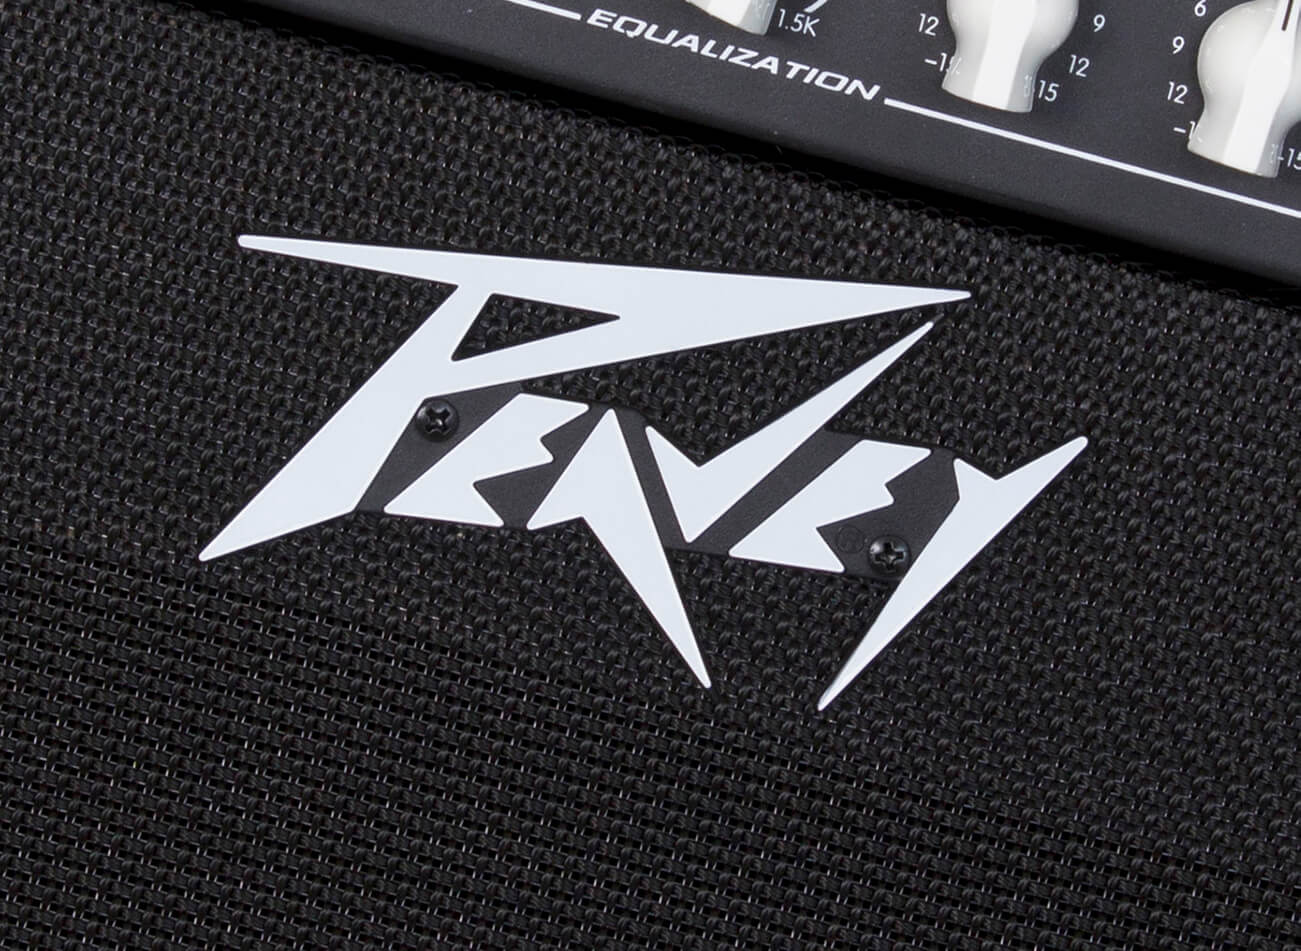 Peavey Logo - Peavey to auction off $12 million worth of old unsold guitars, amps ...